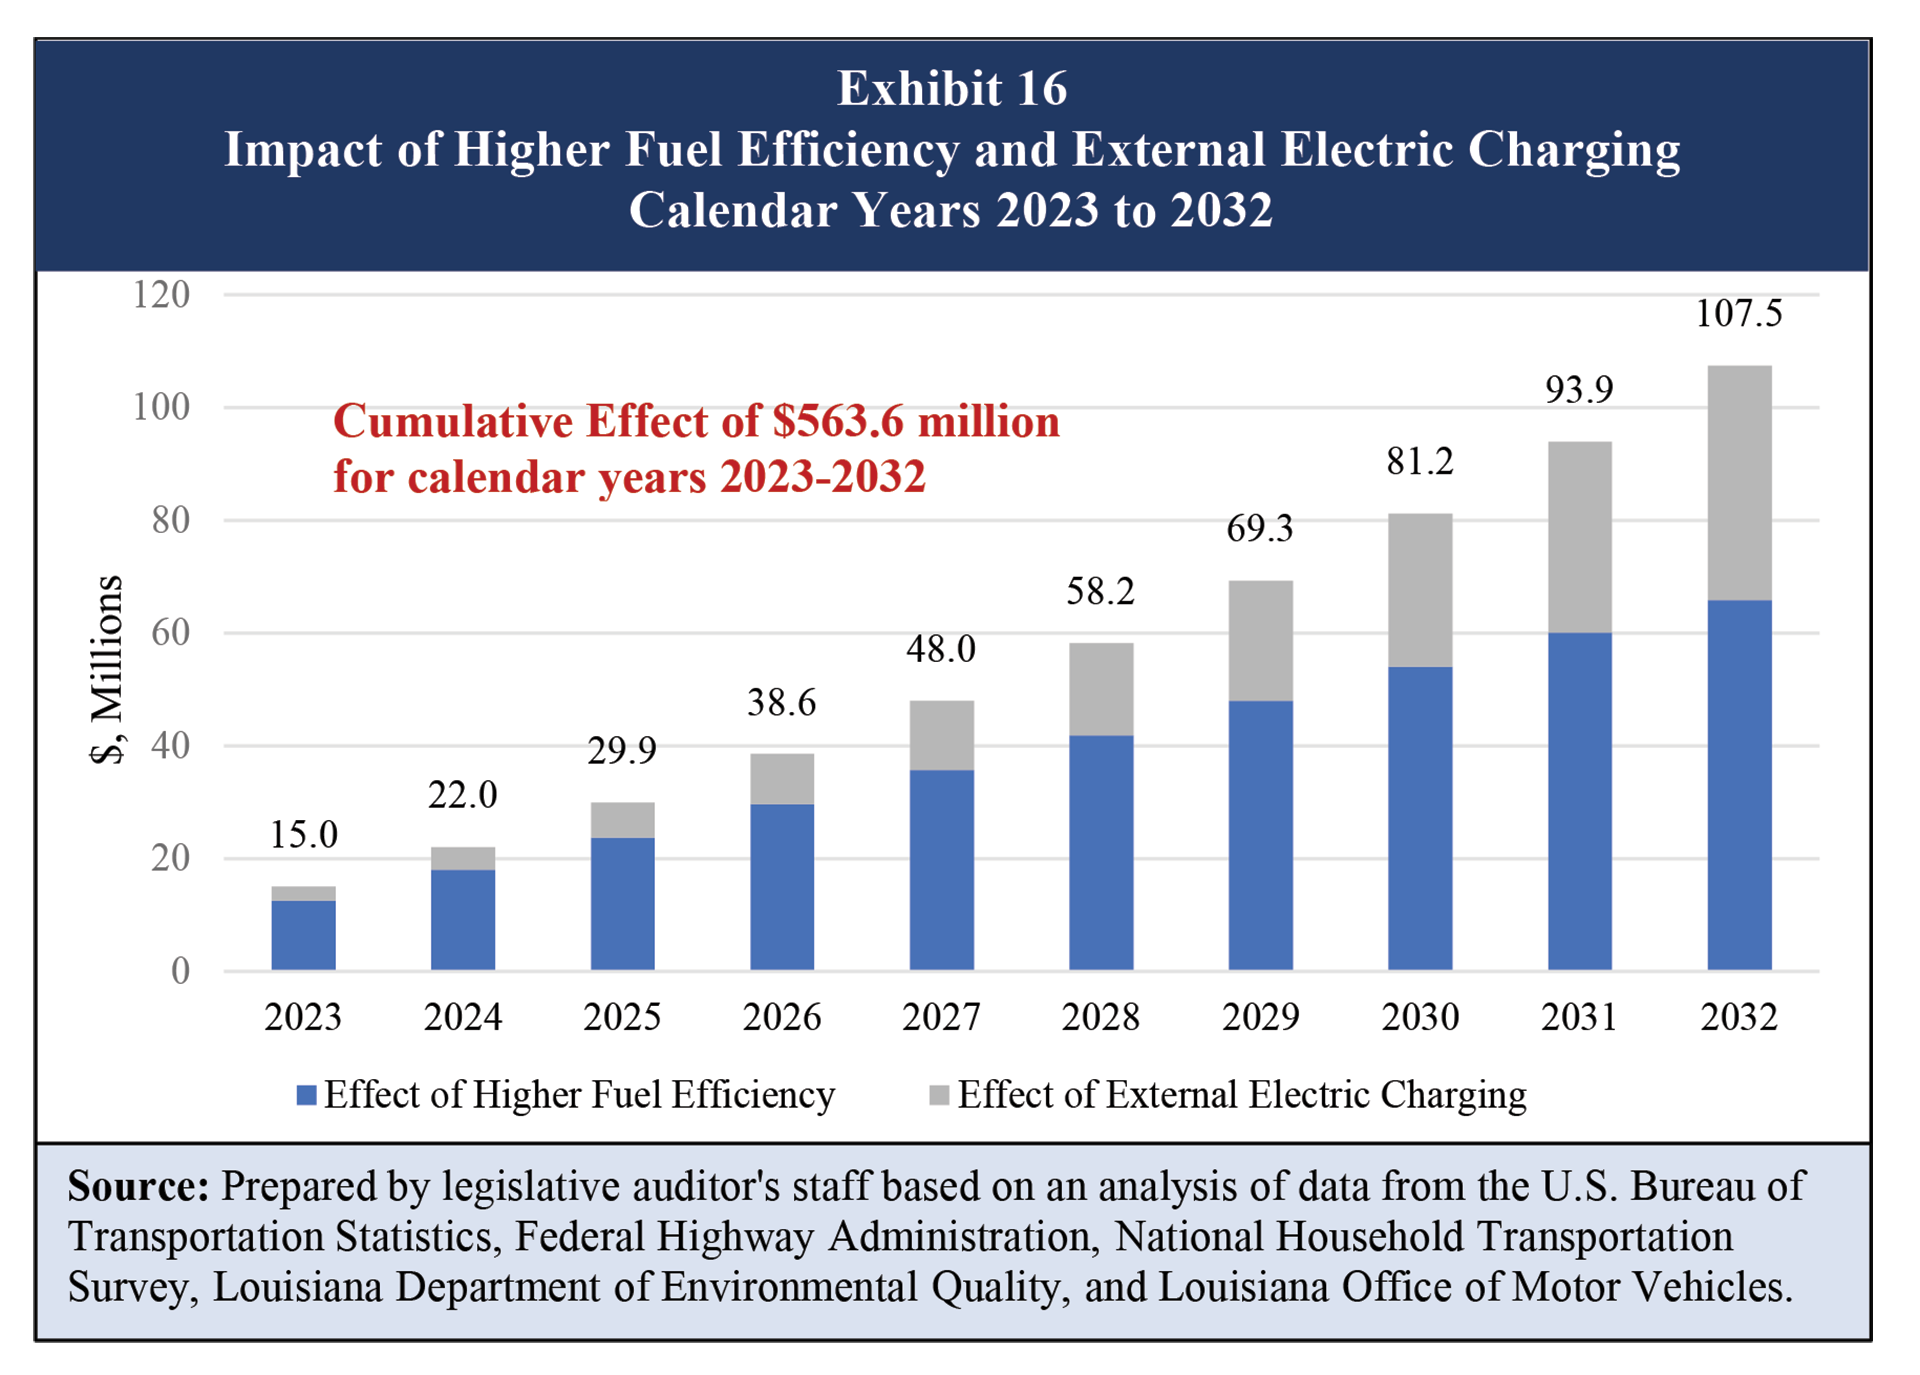 Impact of Higher Fuel Efficiency and External Electric Charging Calendar Years 2023 to 2032